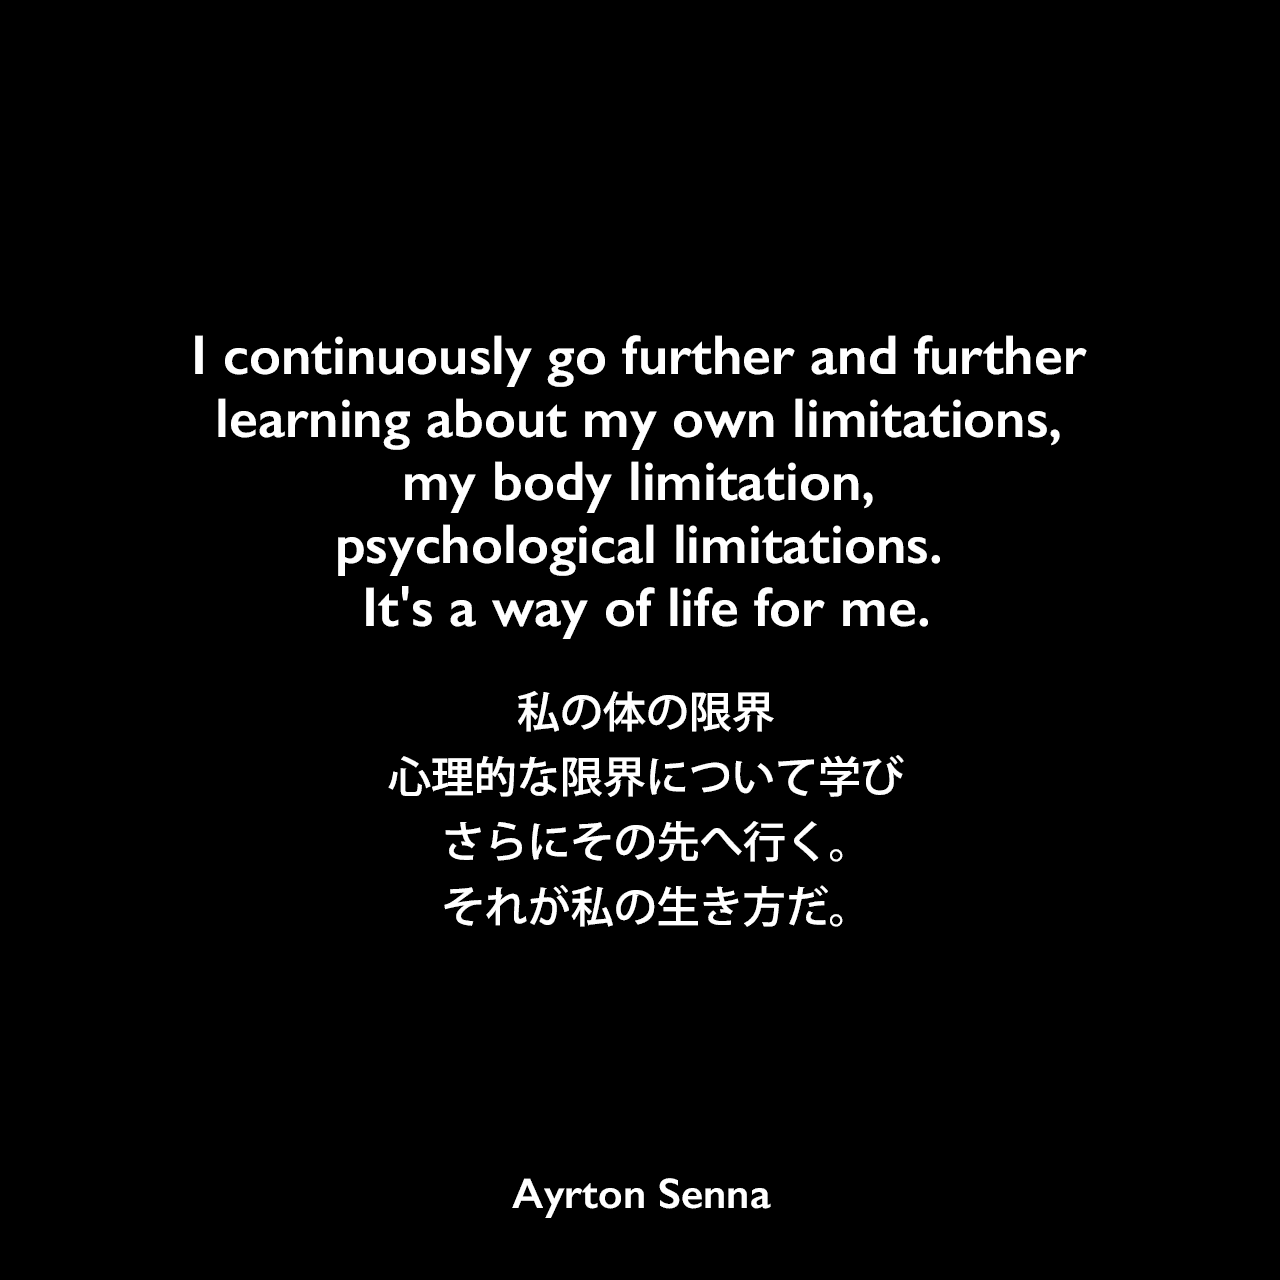 I continuously go further and further learning about my own limitations, my body limitation, psychological limitations. It’s a way of life for me.私の体の限界、心理的な限界について学び、さらにその先へ行く。それが私の生き方だ。